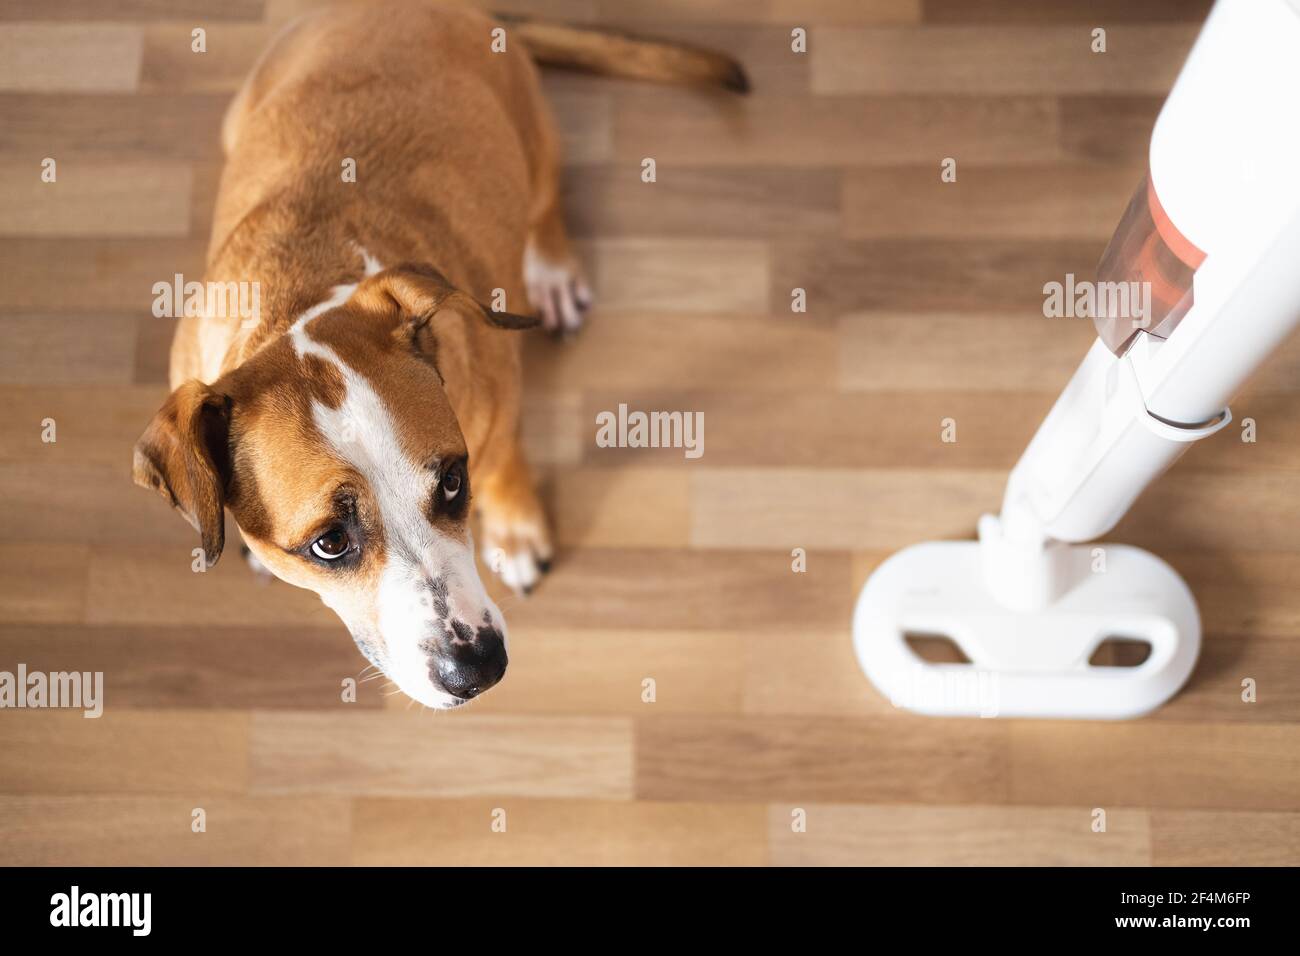 Dog looks at a vacuum cleaner. Pets with household objects, puppy is afraid of a loud vacuum cleaner Stock Photo